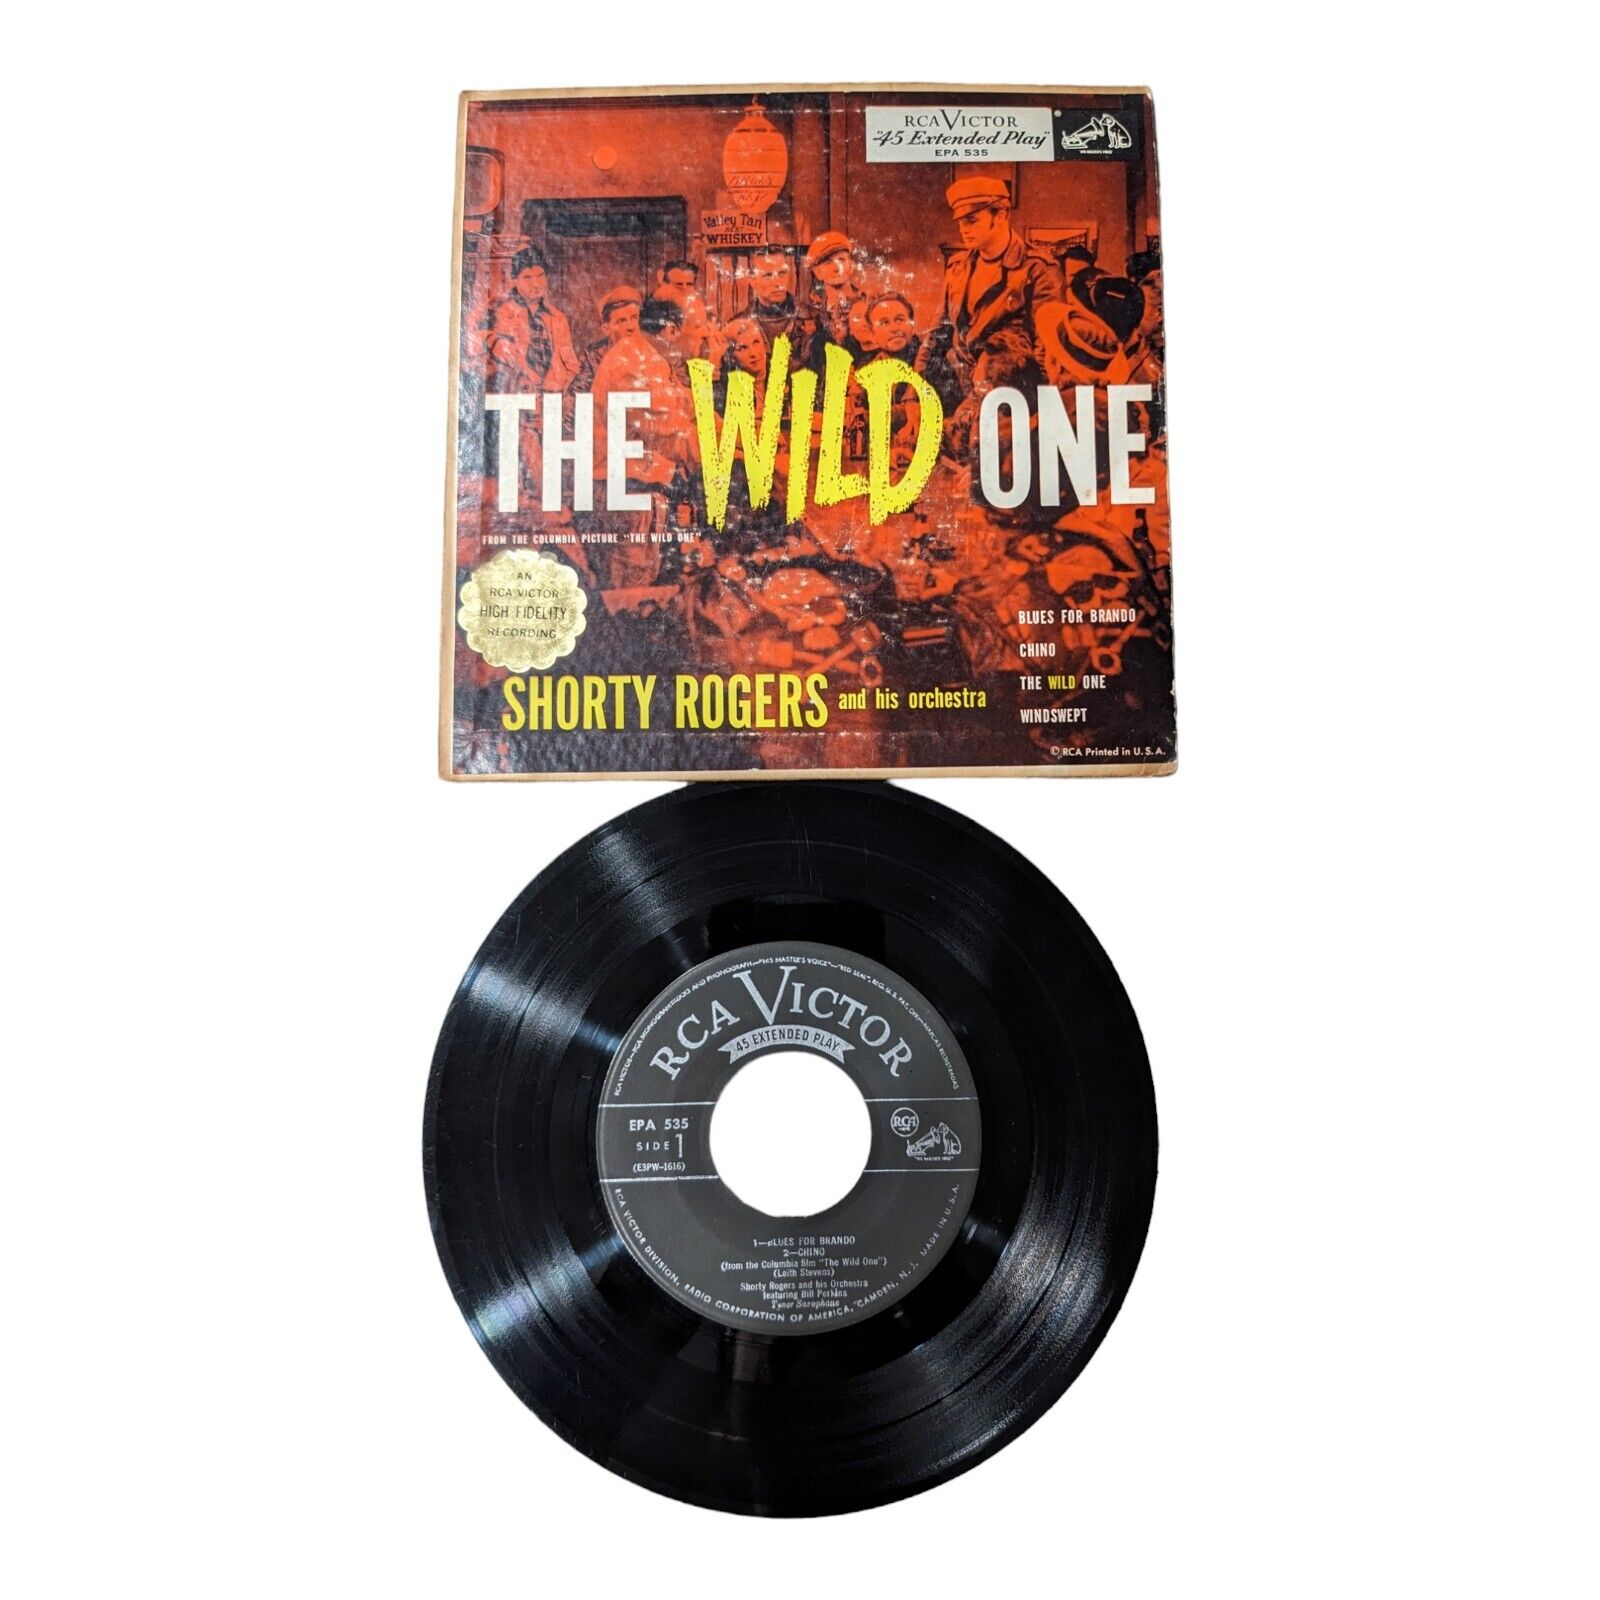 Shorty Rogers And His Orchestra jazz 45 EP The Wild One on RCA Victor